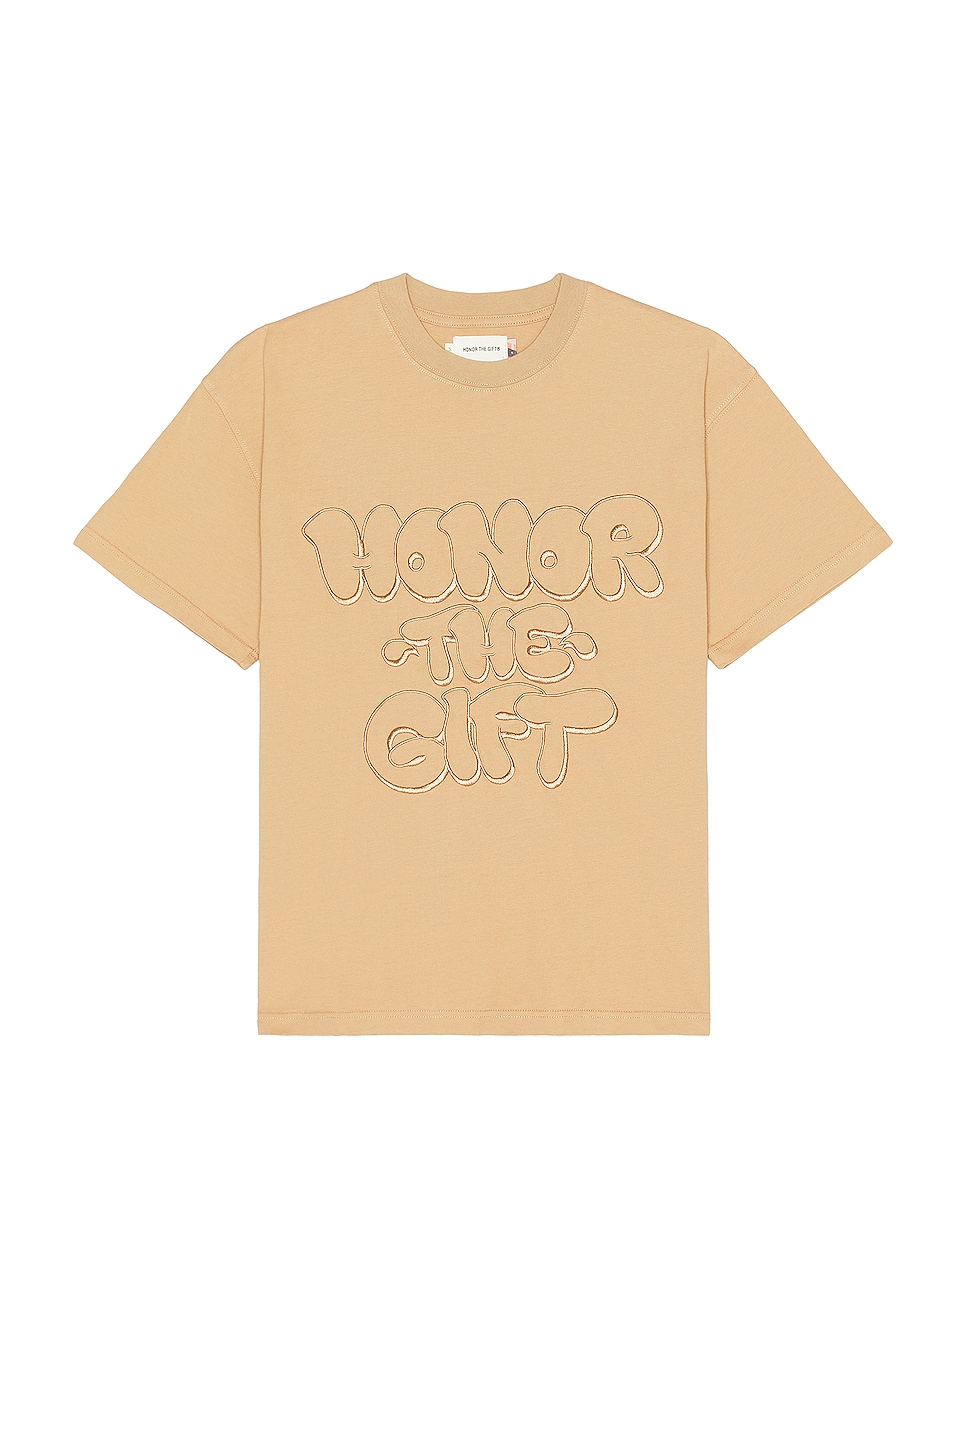 Image 1 of Honor The Gift Amp'd Up Tee in Tan